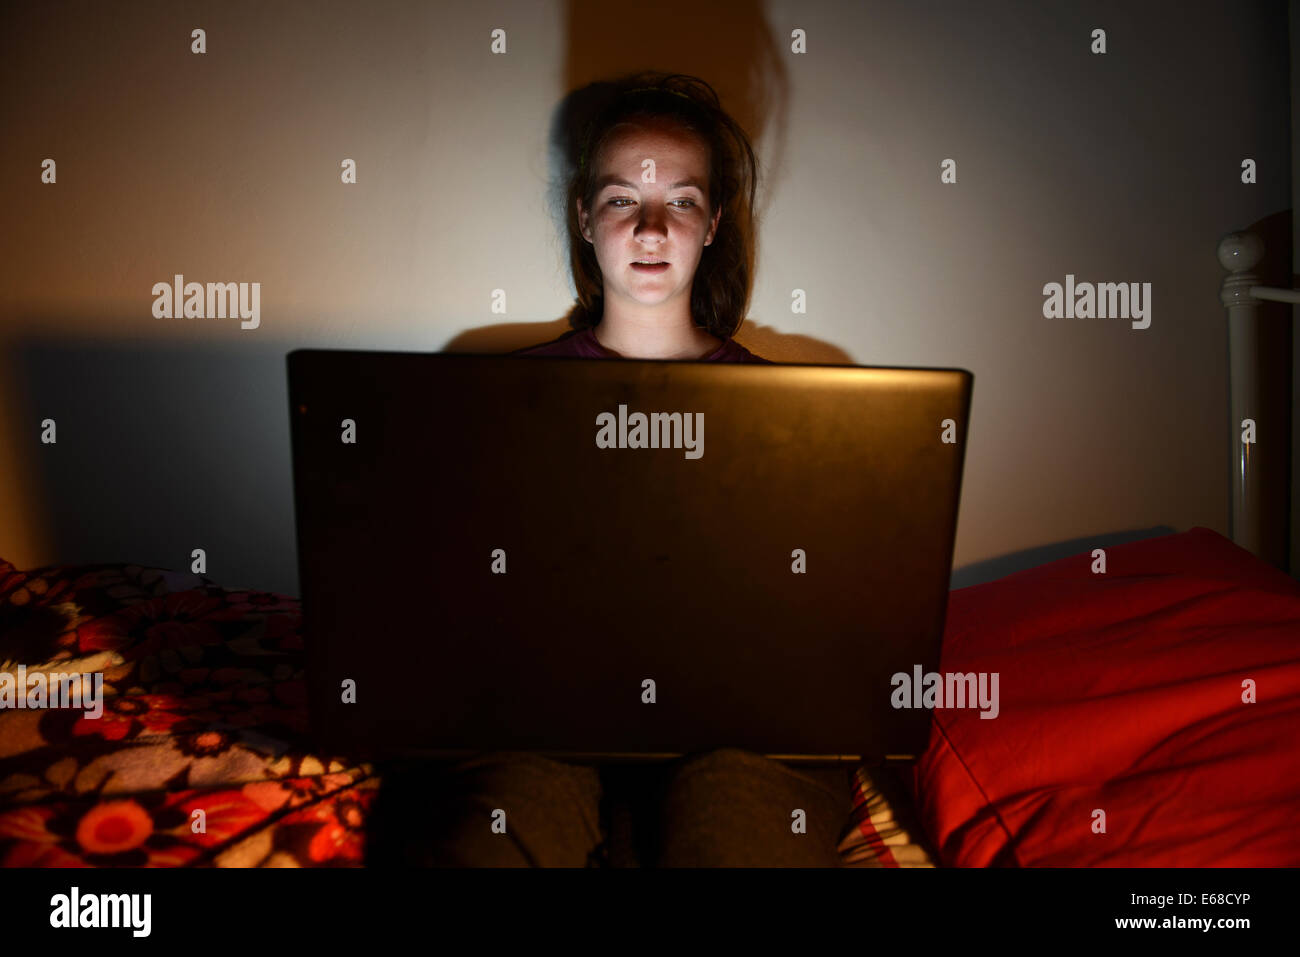 Computer laptop being used by a child in her bedroom, teenage girl using a computer laptop alone in her room Stock Photo